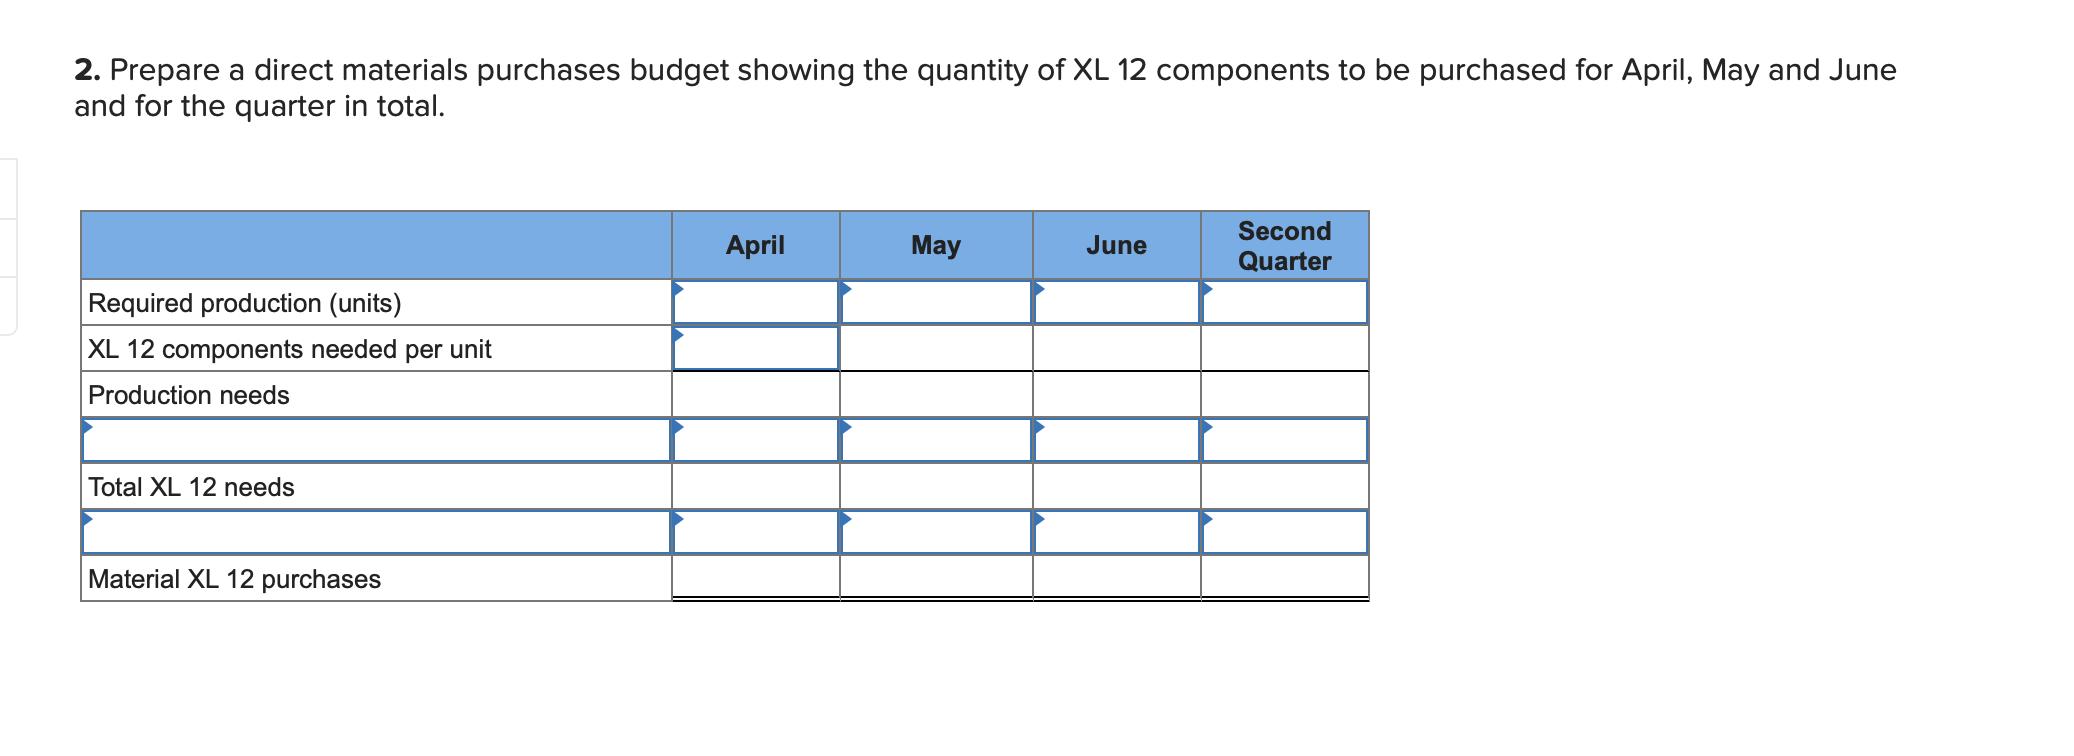 2. Prepare a direct materials purchases budget showing the quantity of XL 12 components to be purchased for April, May and Ju